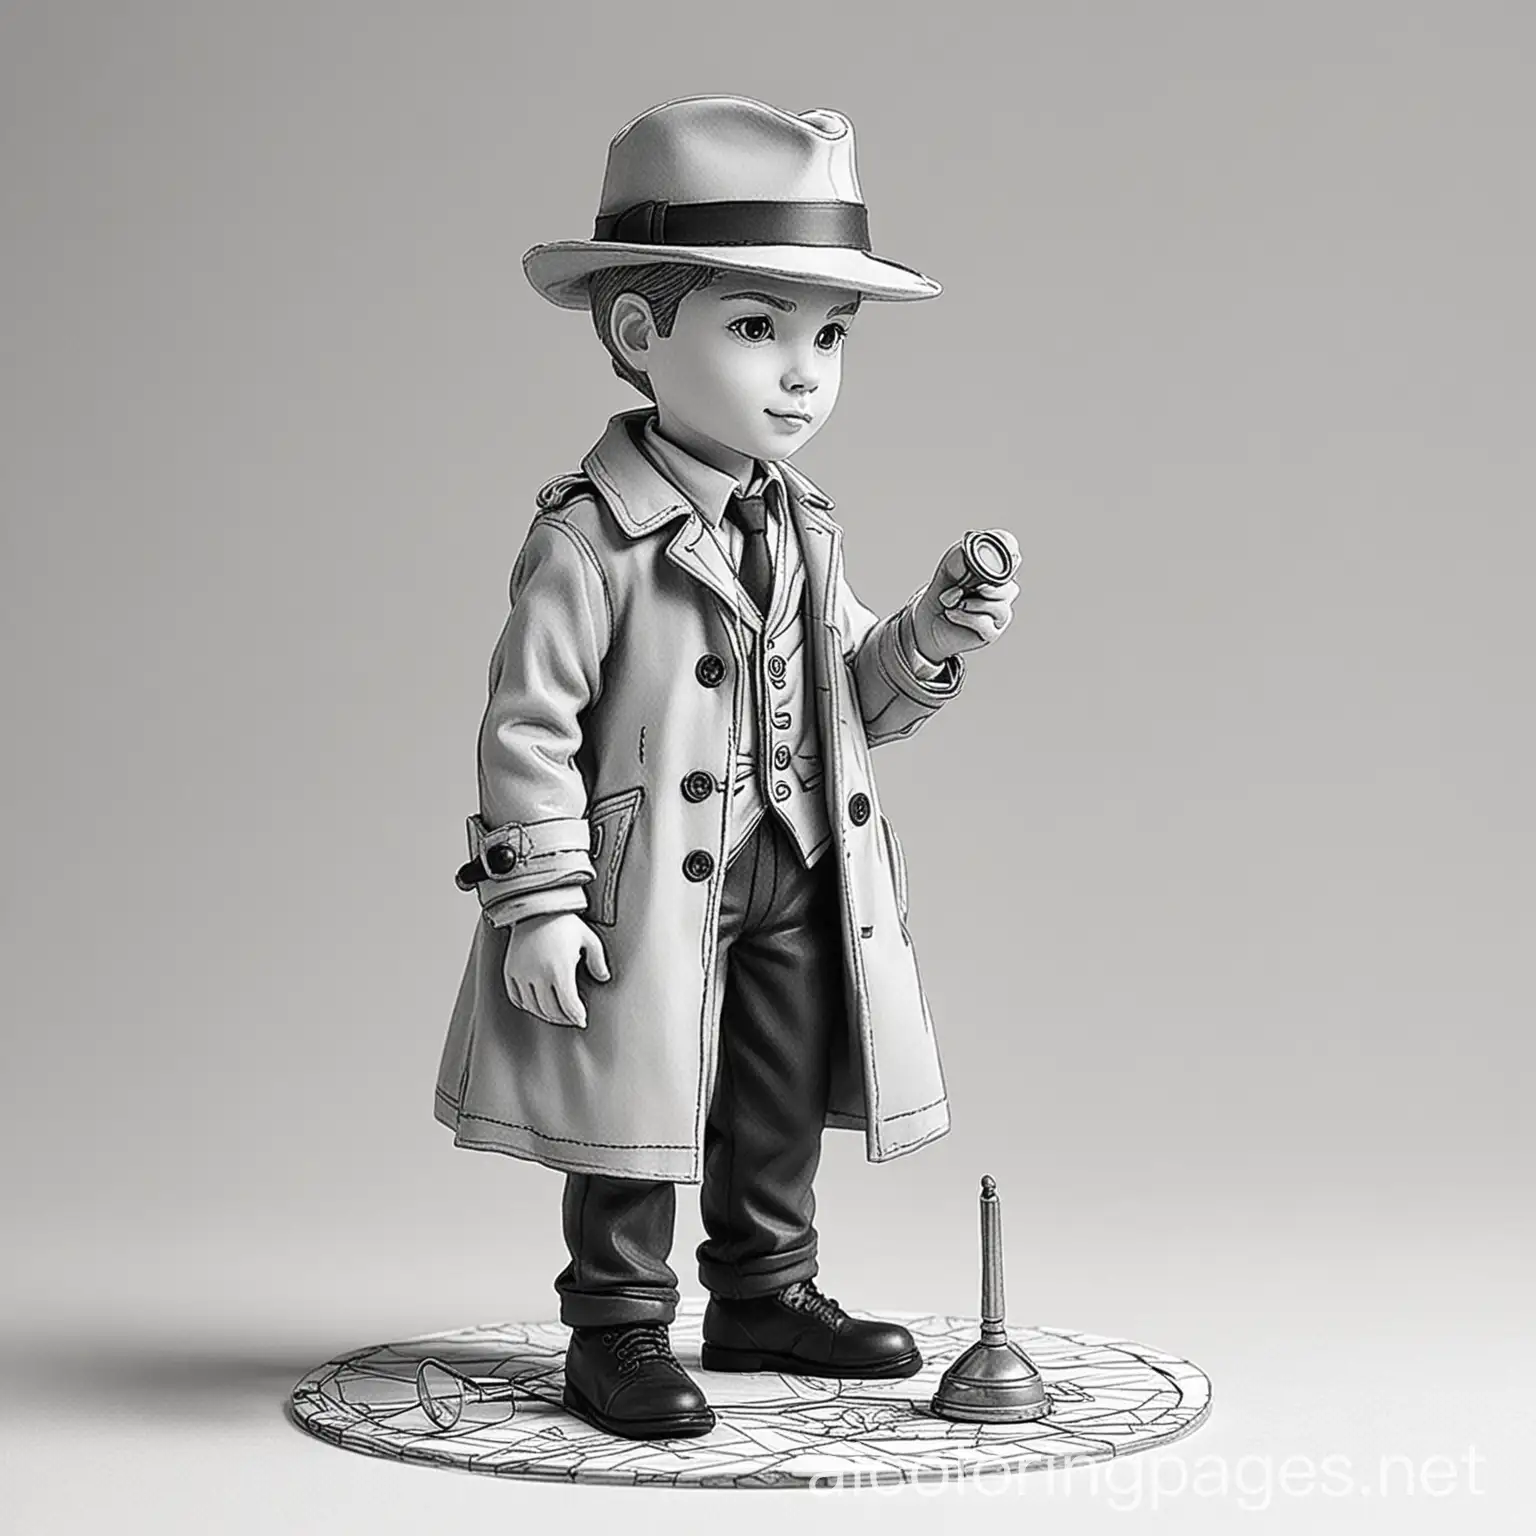 Draw the detective as the central figure. Show them in a thoughtful pose, kneeling or bending over to inspect clues. Add details such as a detective hat, trench coat, and a magnifying glass in their hand. Colouring Page, black and white, line art, white background, Simplicity, Ample White Space. The background of the colouring page is plain white to make it easy for young children to colour within the lines. The outlines of all the subjects are easy to distinguish, making it simple for kids to colour without too much difficulty ,, Coloring Page, black and white, line art, white background, Simplicity, Ample White Space. The background of the coloring page is plain white to make it easy for young children to color within the lines. The outlines of all the subjects are easy to distinguish, making it simple for kids to color without too much difficulty